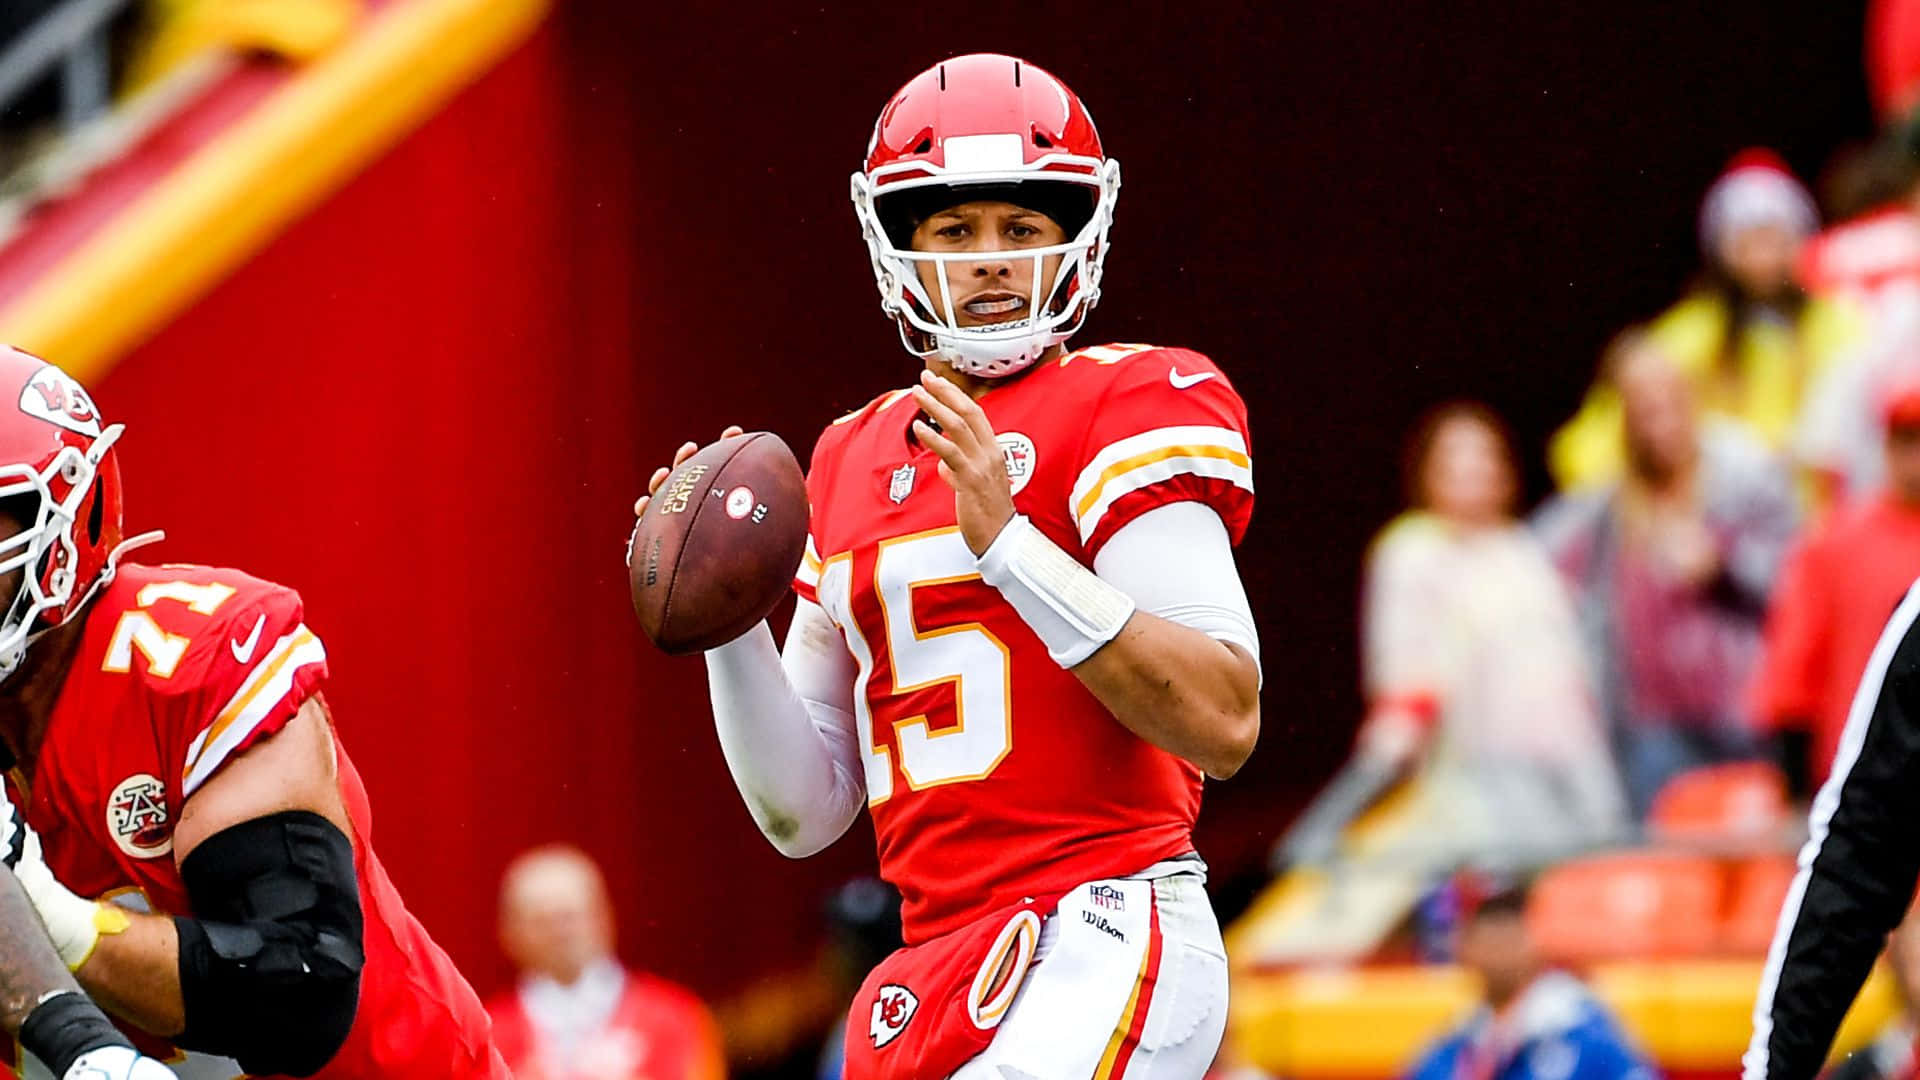 Patrick Mahomes in action during an NFL game